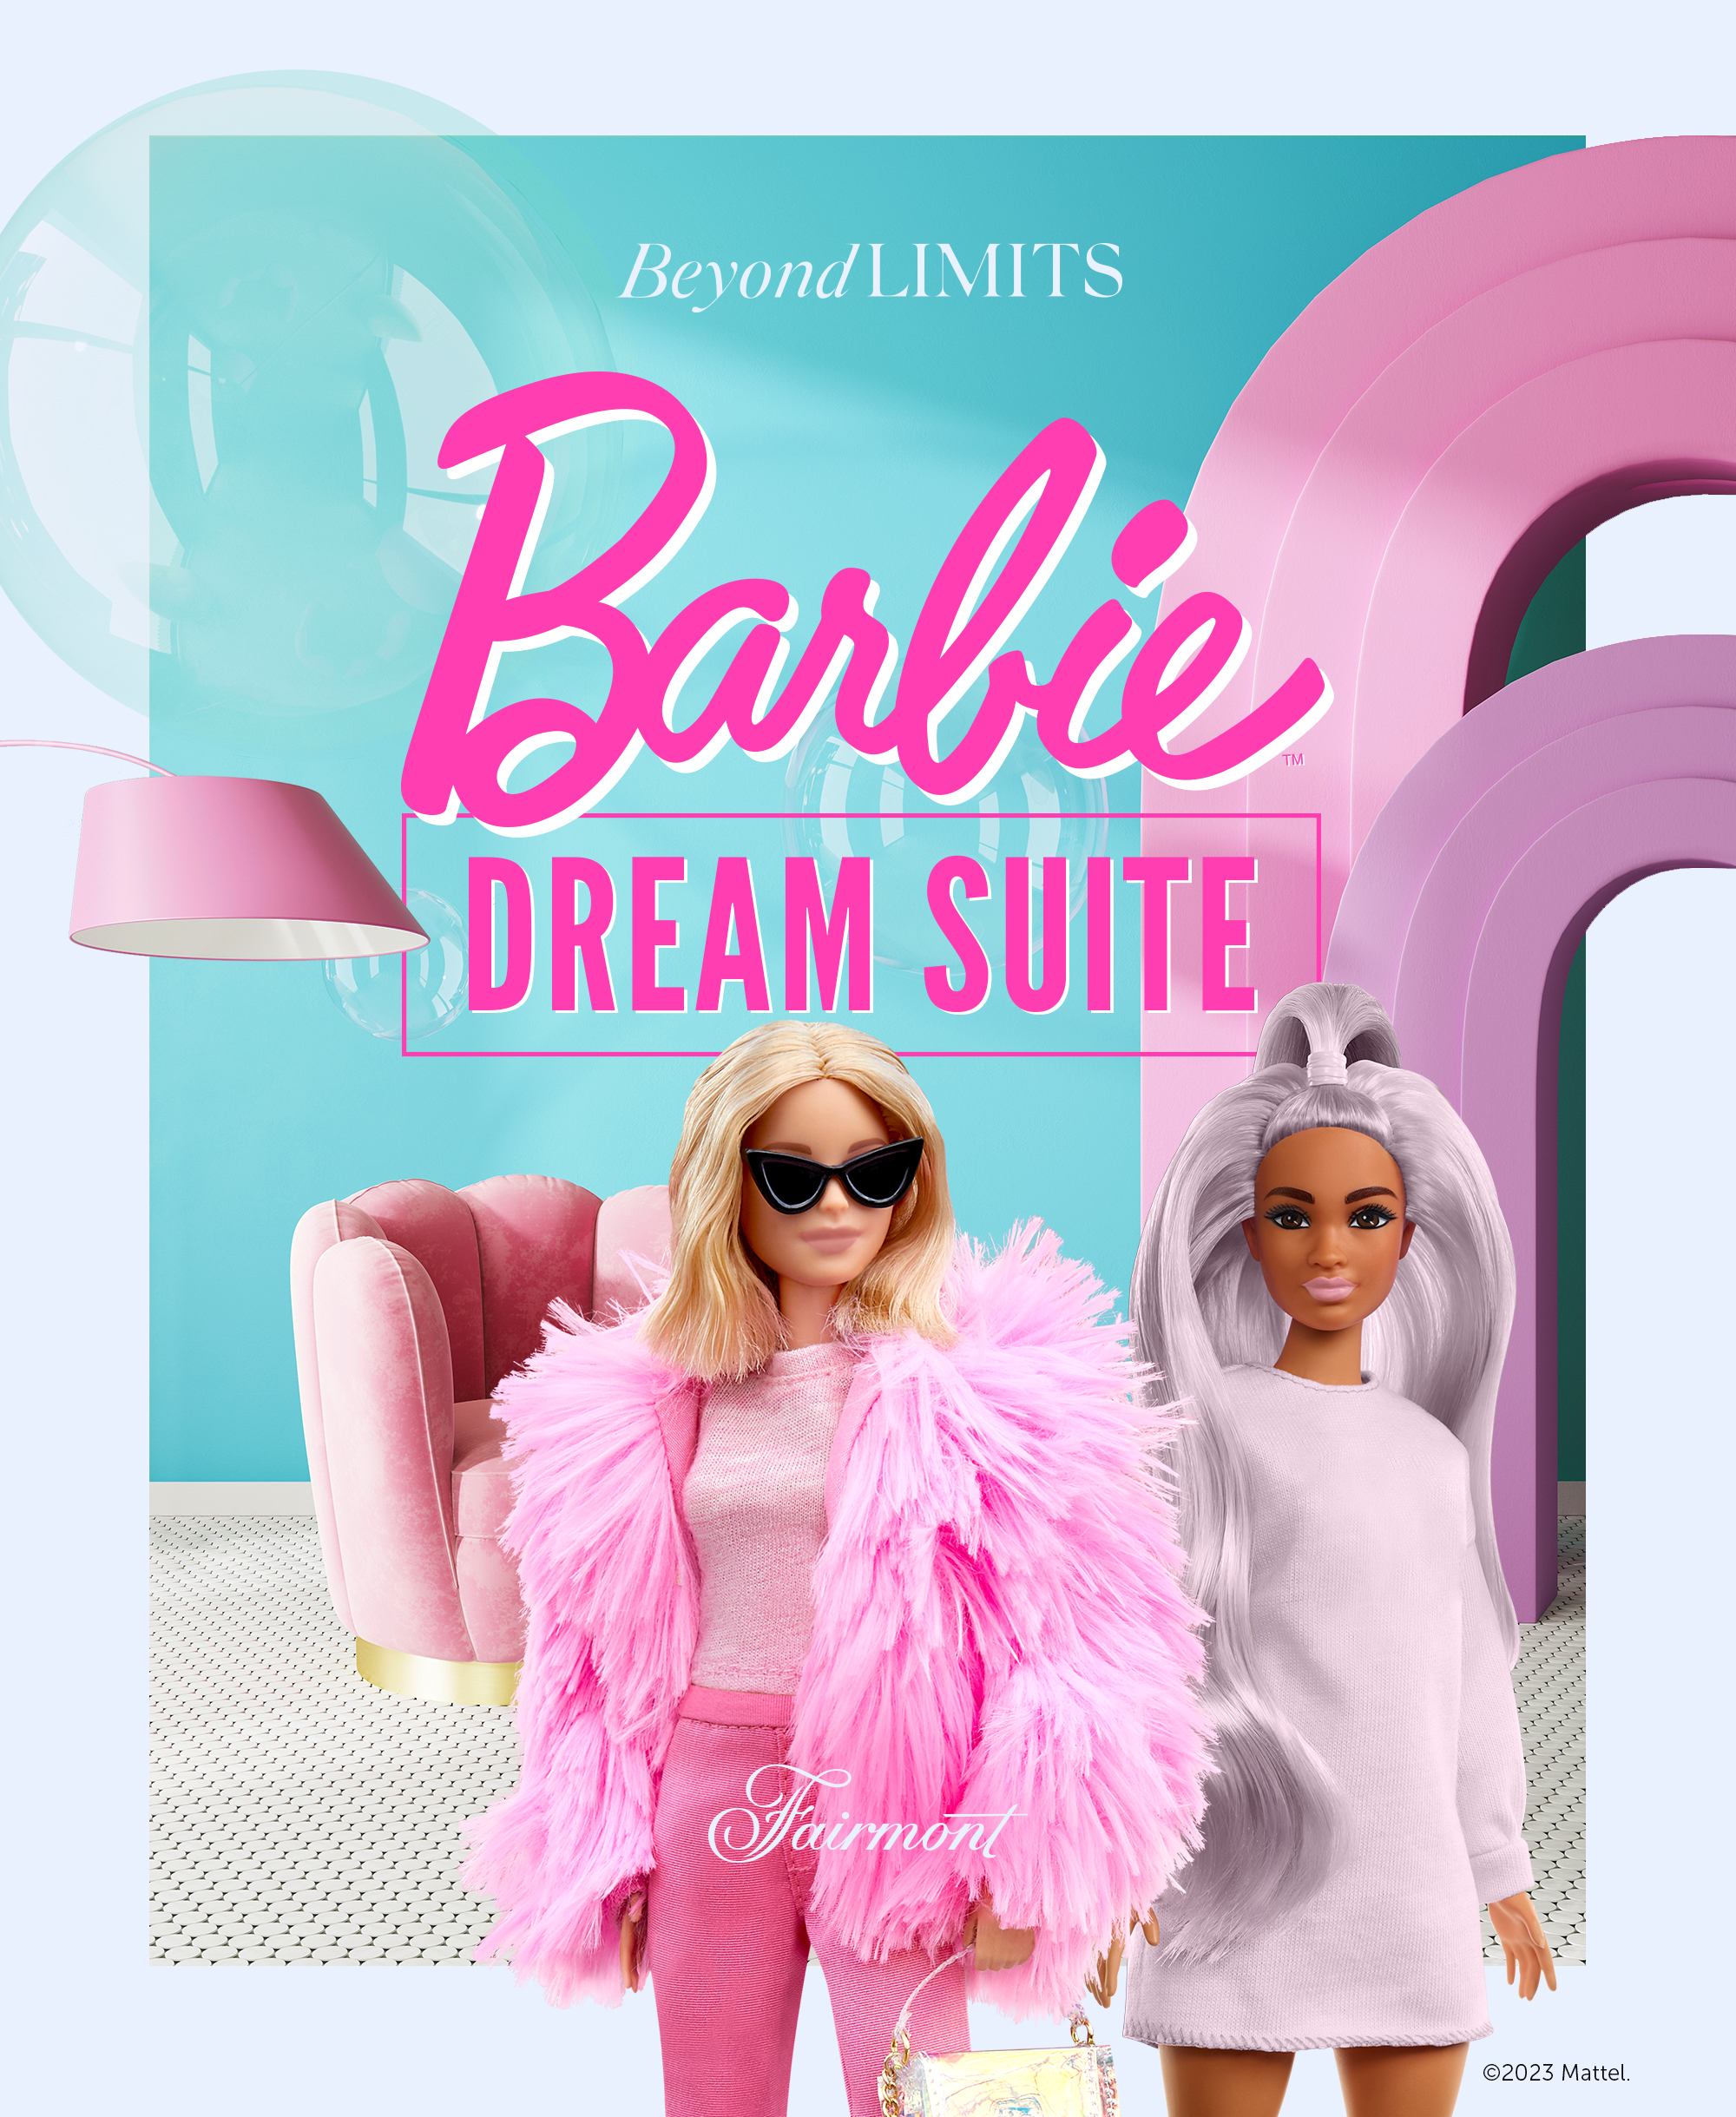 Dream big! Stay in Canada's first hotel suite inspired by the global icon, Barbie.